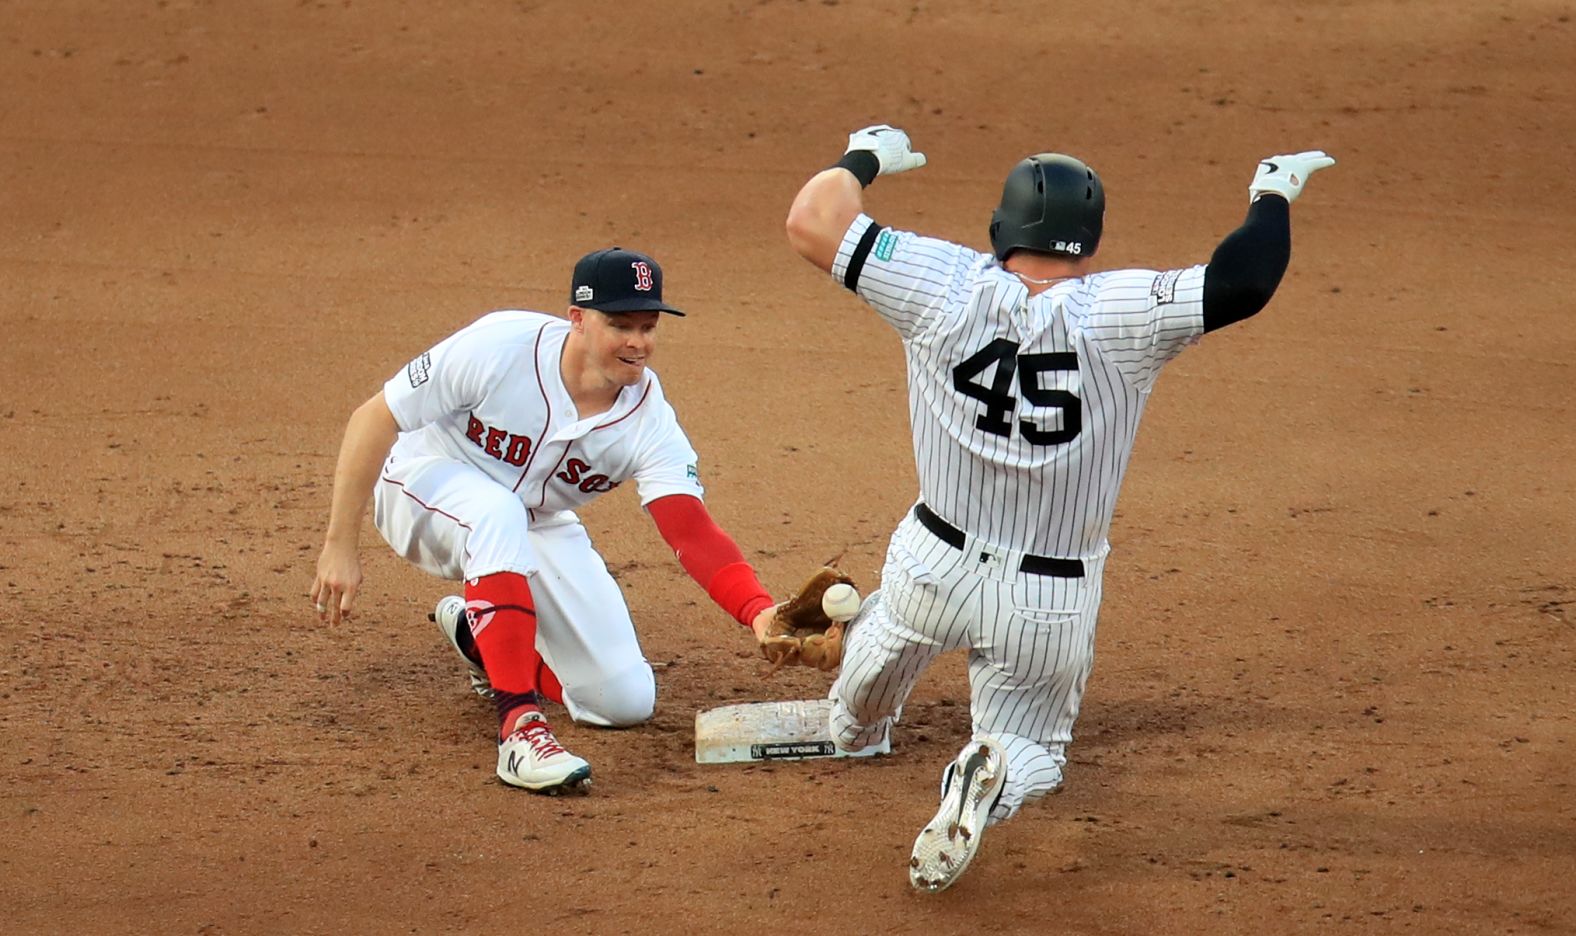 Red Sox infielder Brock Holt fails to hold onto the ball as Yankees first baseman Luke Voit slides into second base during game one of the MLB London series on June 29.